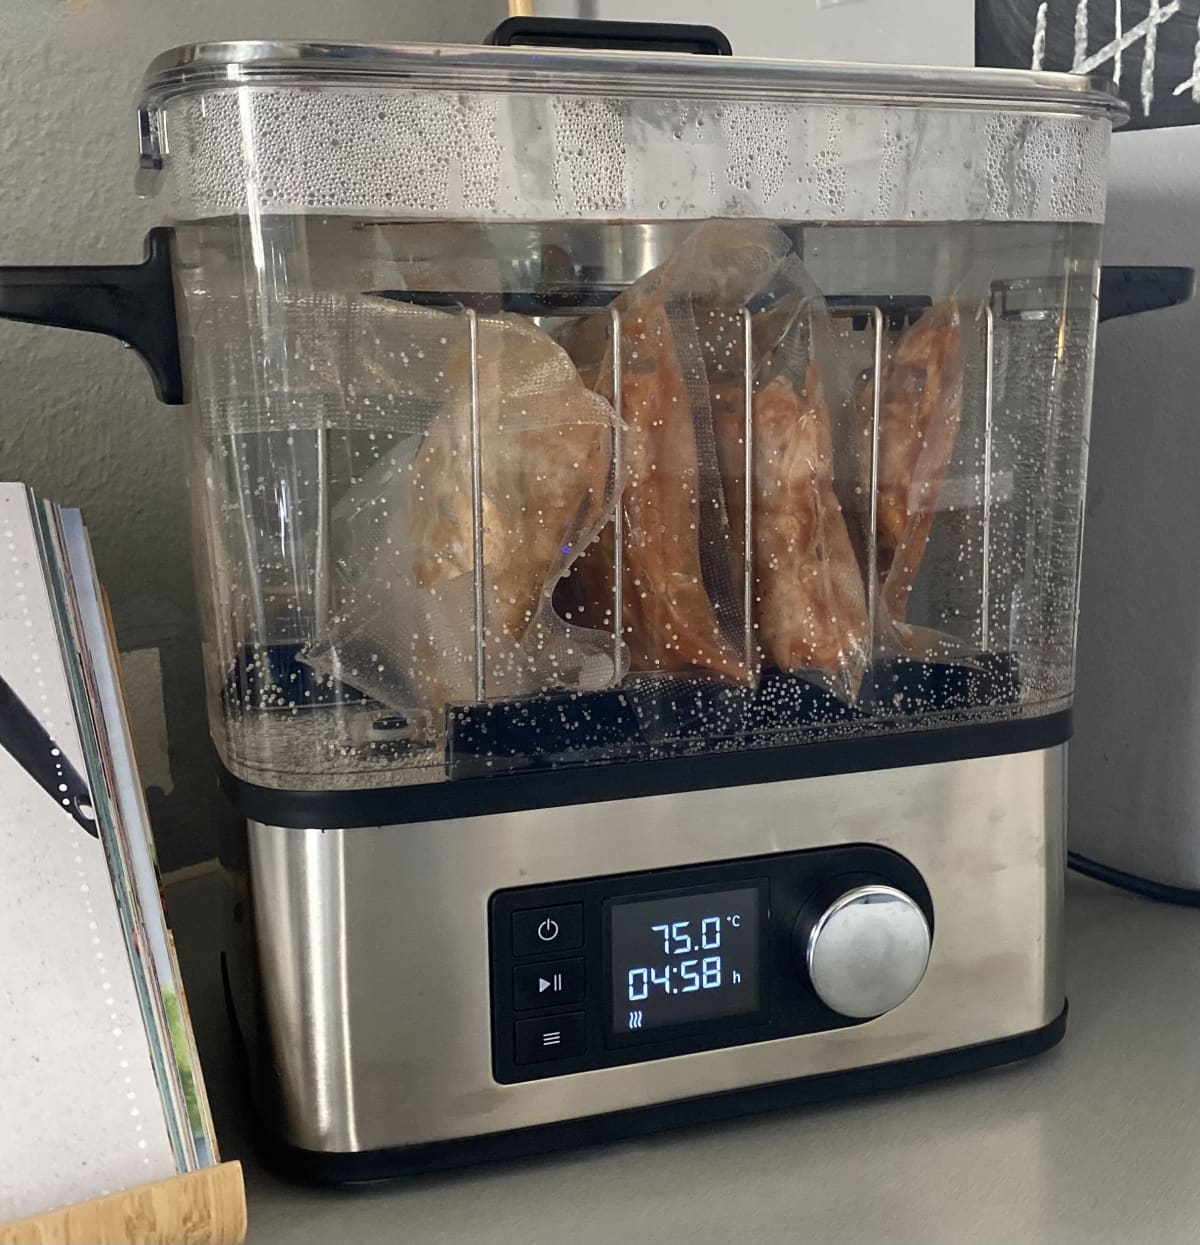 Meat cooking inside a sous vide cooker